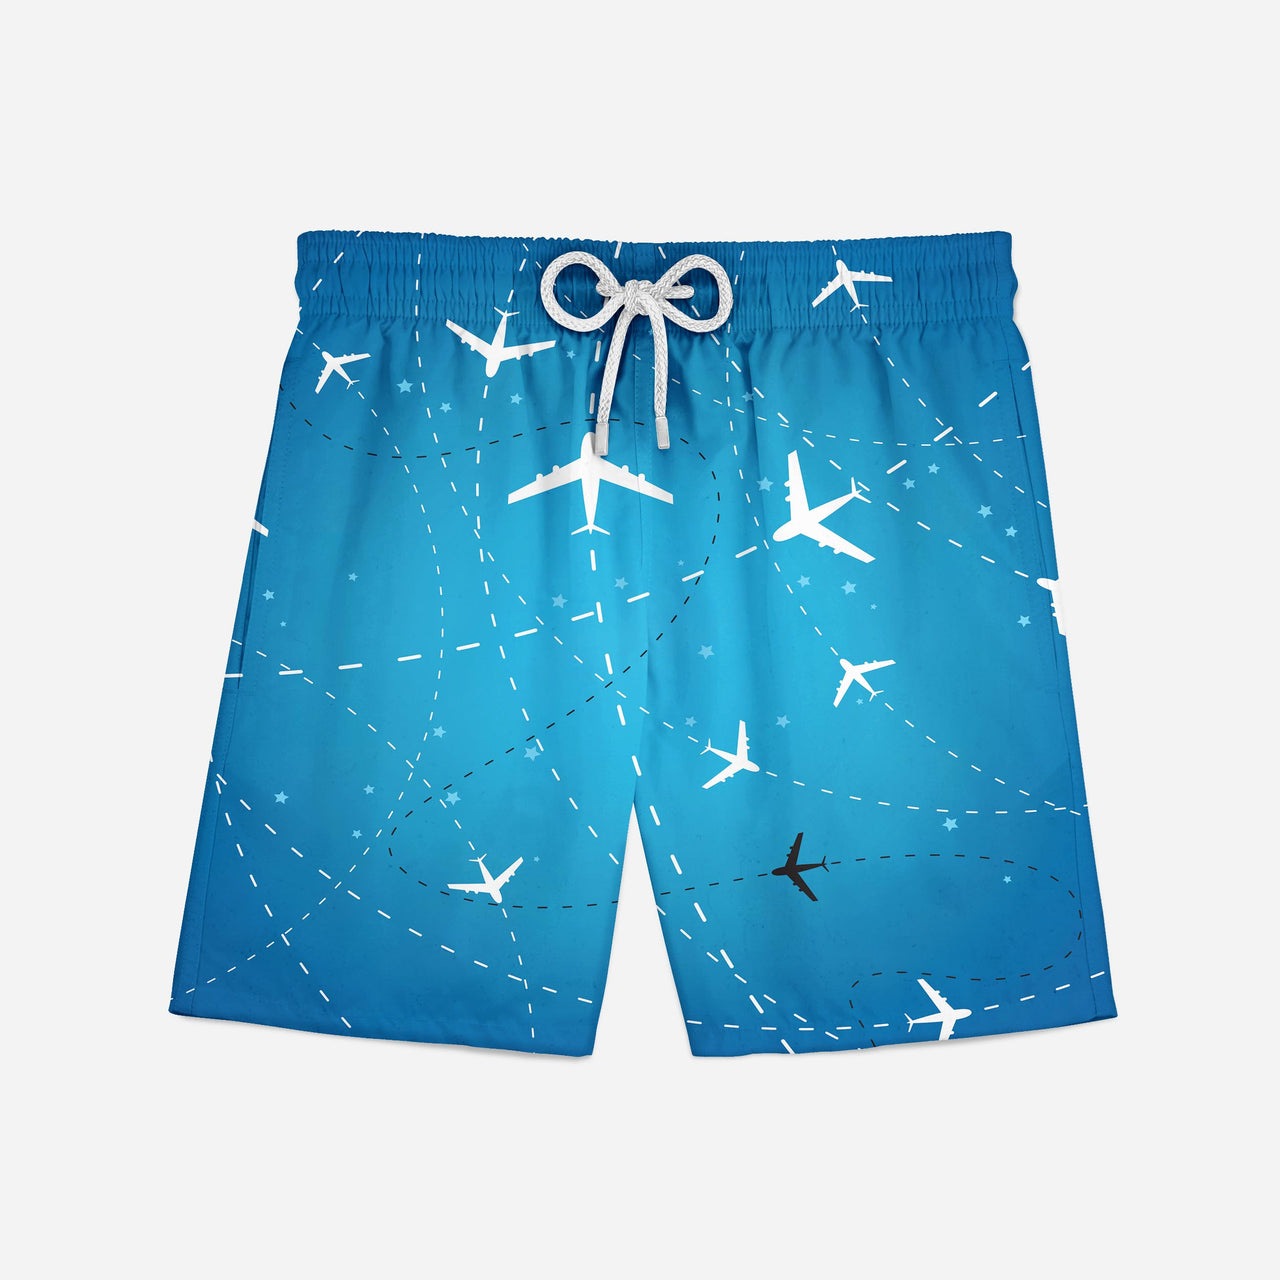 Travelling with Aircraft Designed Swim Trunks & Shorts